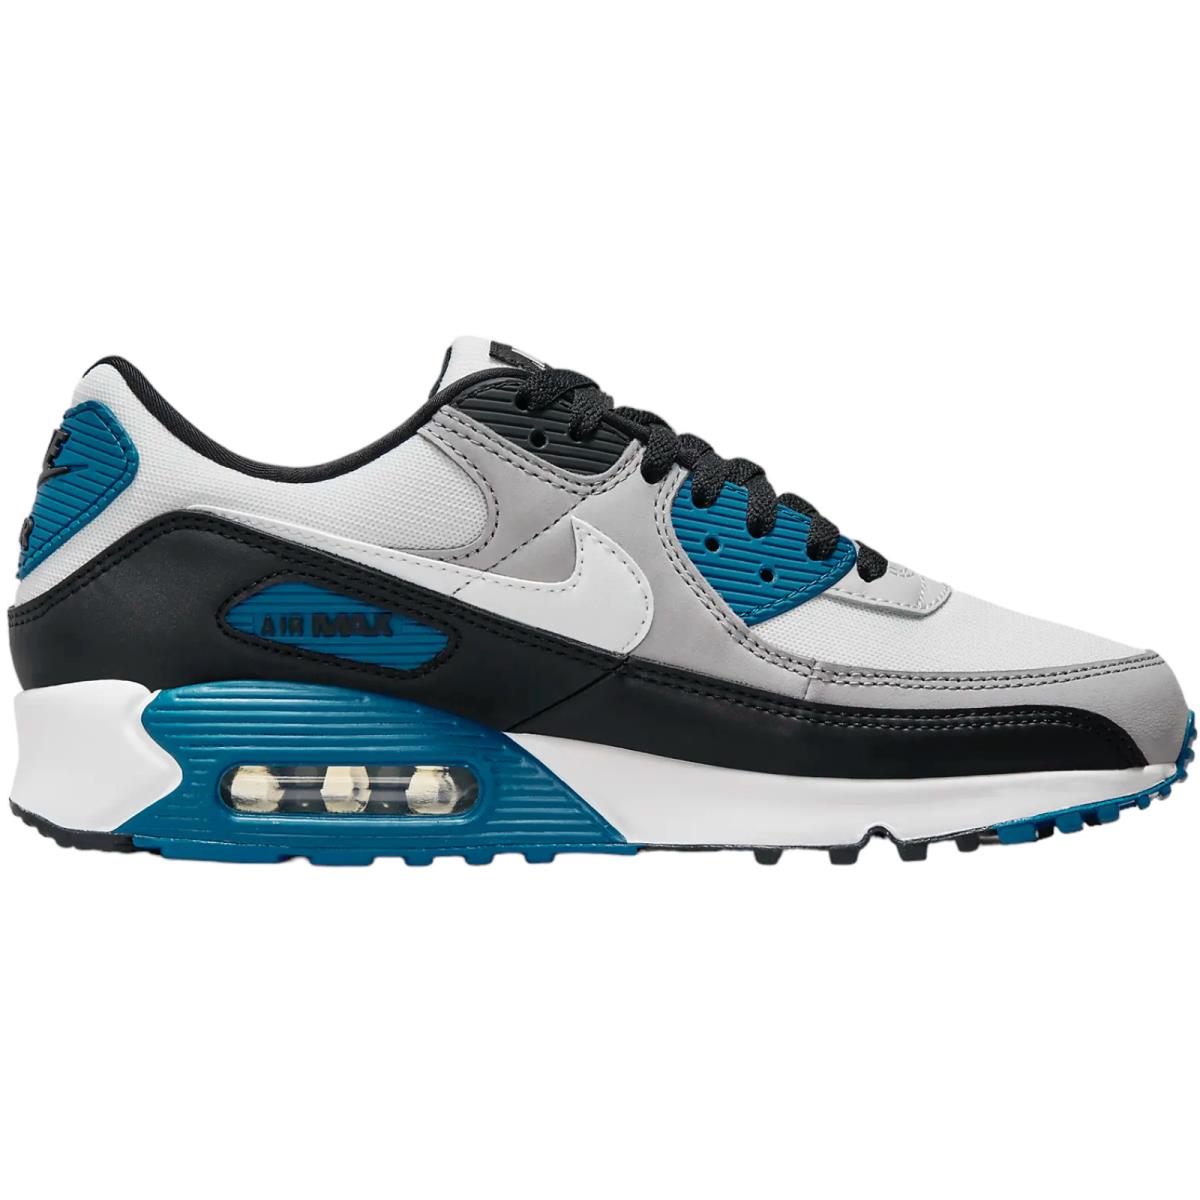 Nike Air Max 90 Men`s Casual Shoes All Colors US Sizes 7-14 Bestseller Light Smoke Grey/Black/Blue/Summit White